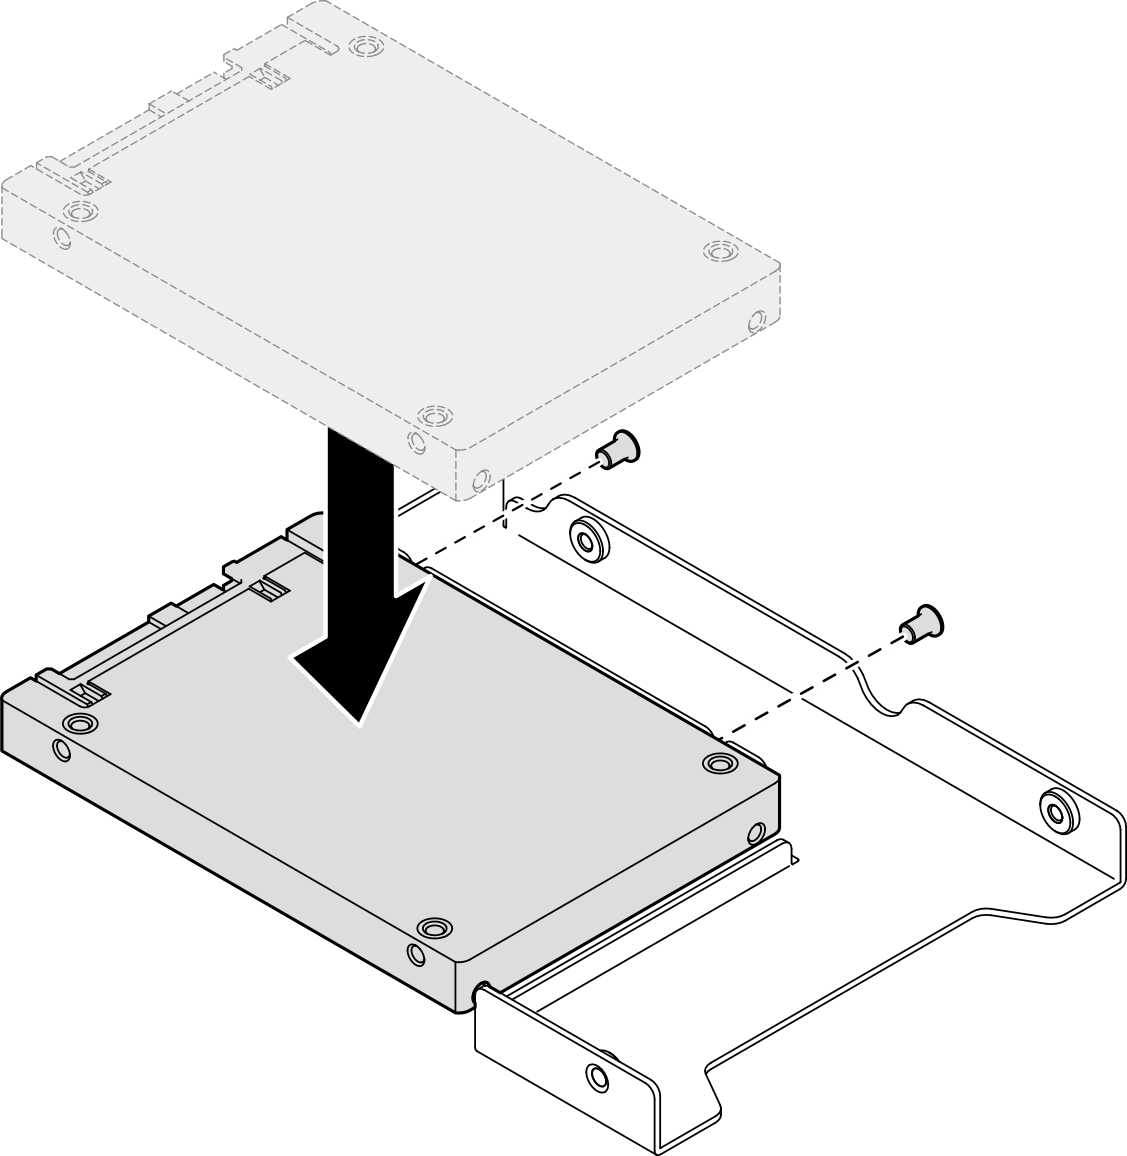 Installing 2.5-inch drive to drive adapter